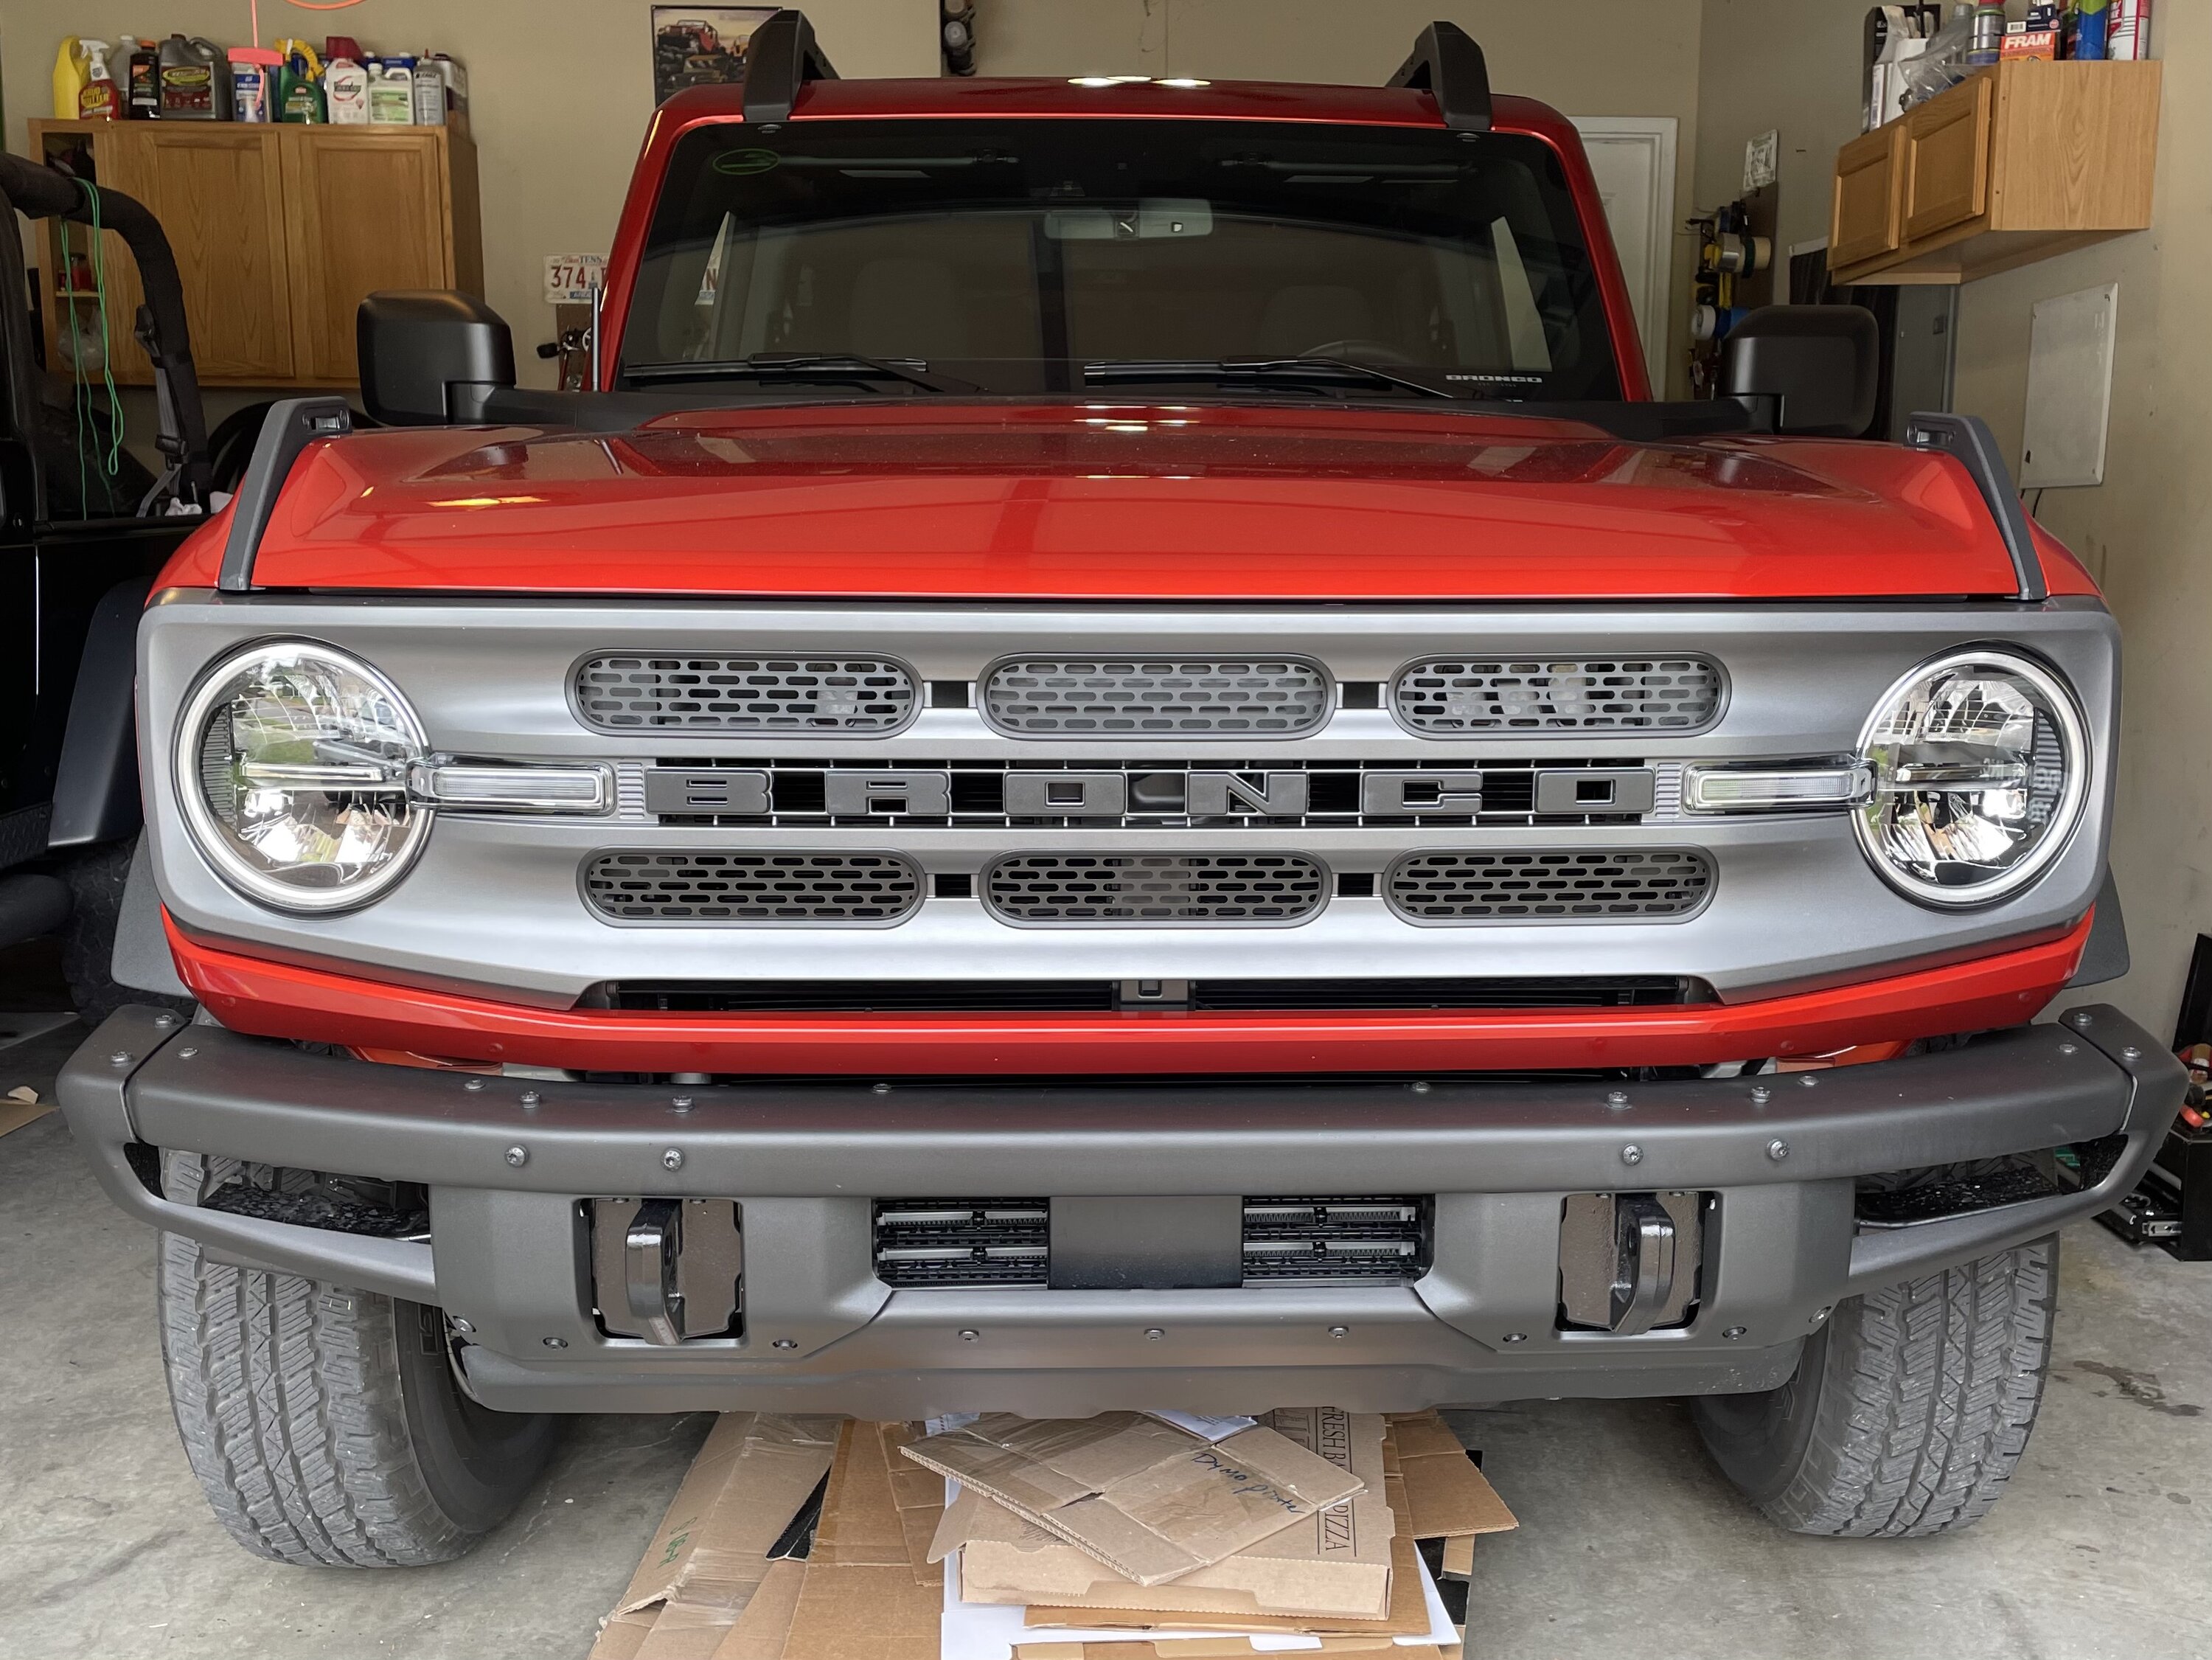 Ford Bronco Mesh grill inserts installed on Big Bend IMG_3857